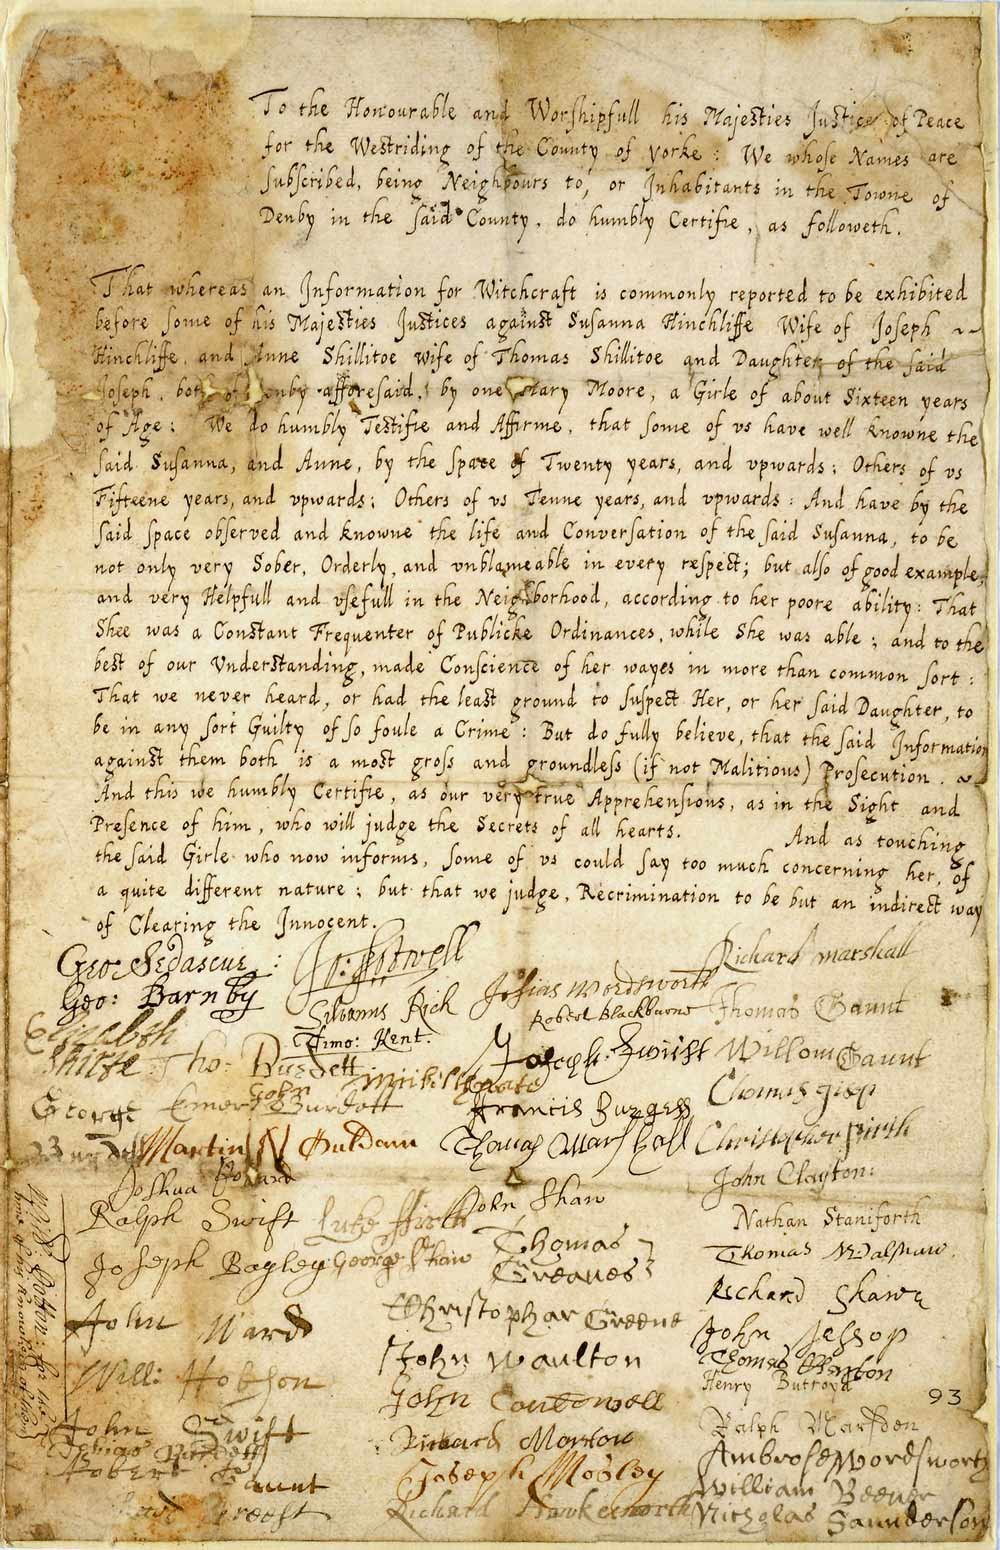 A large paragraph of clear, tidy handwriting above roughly 50 different signatures.